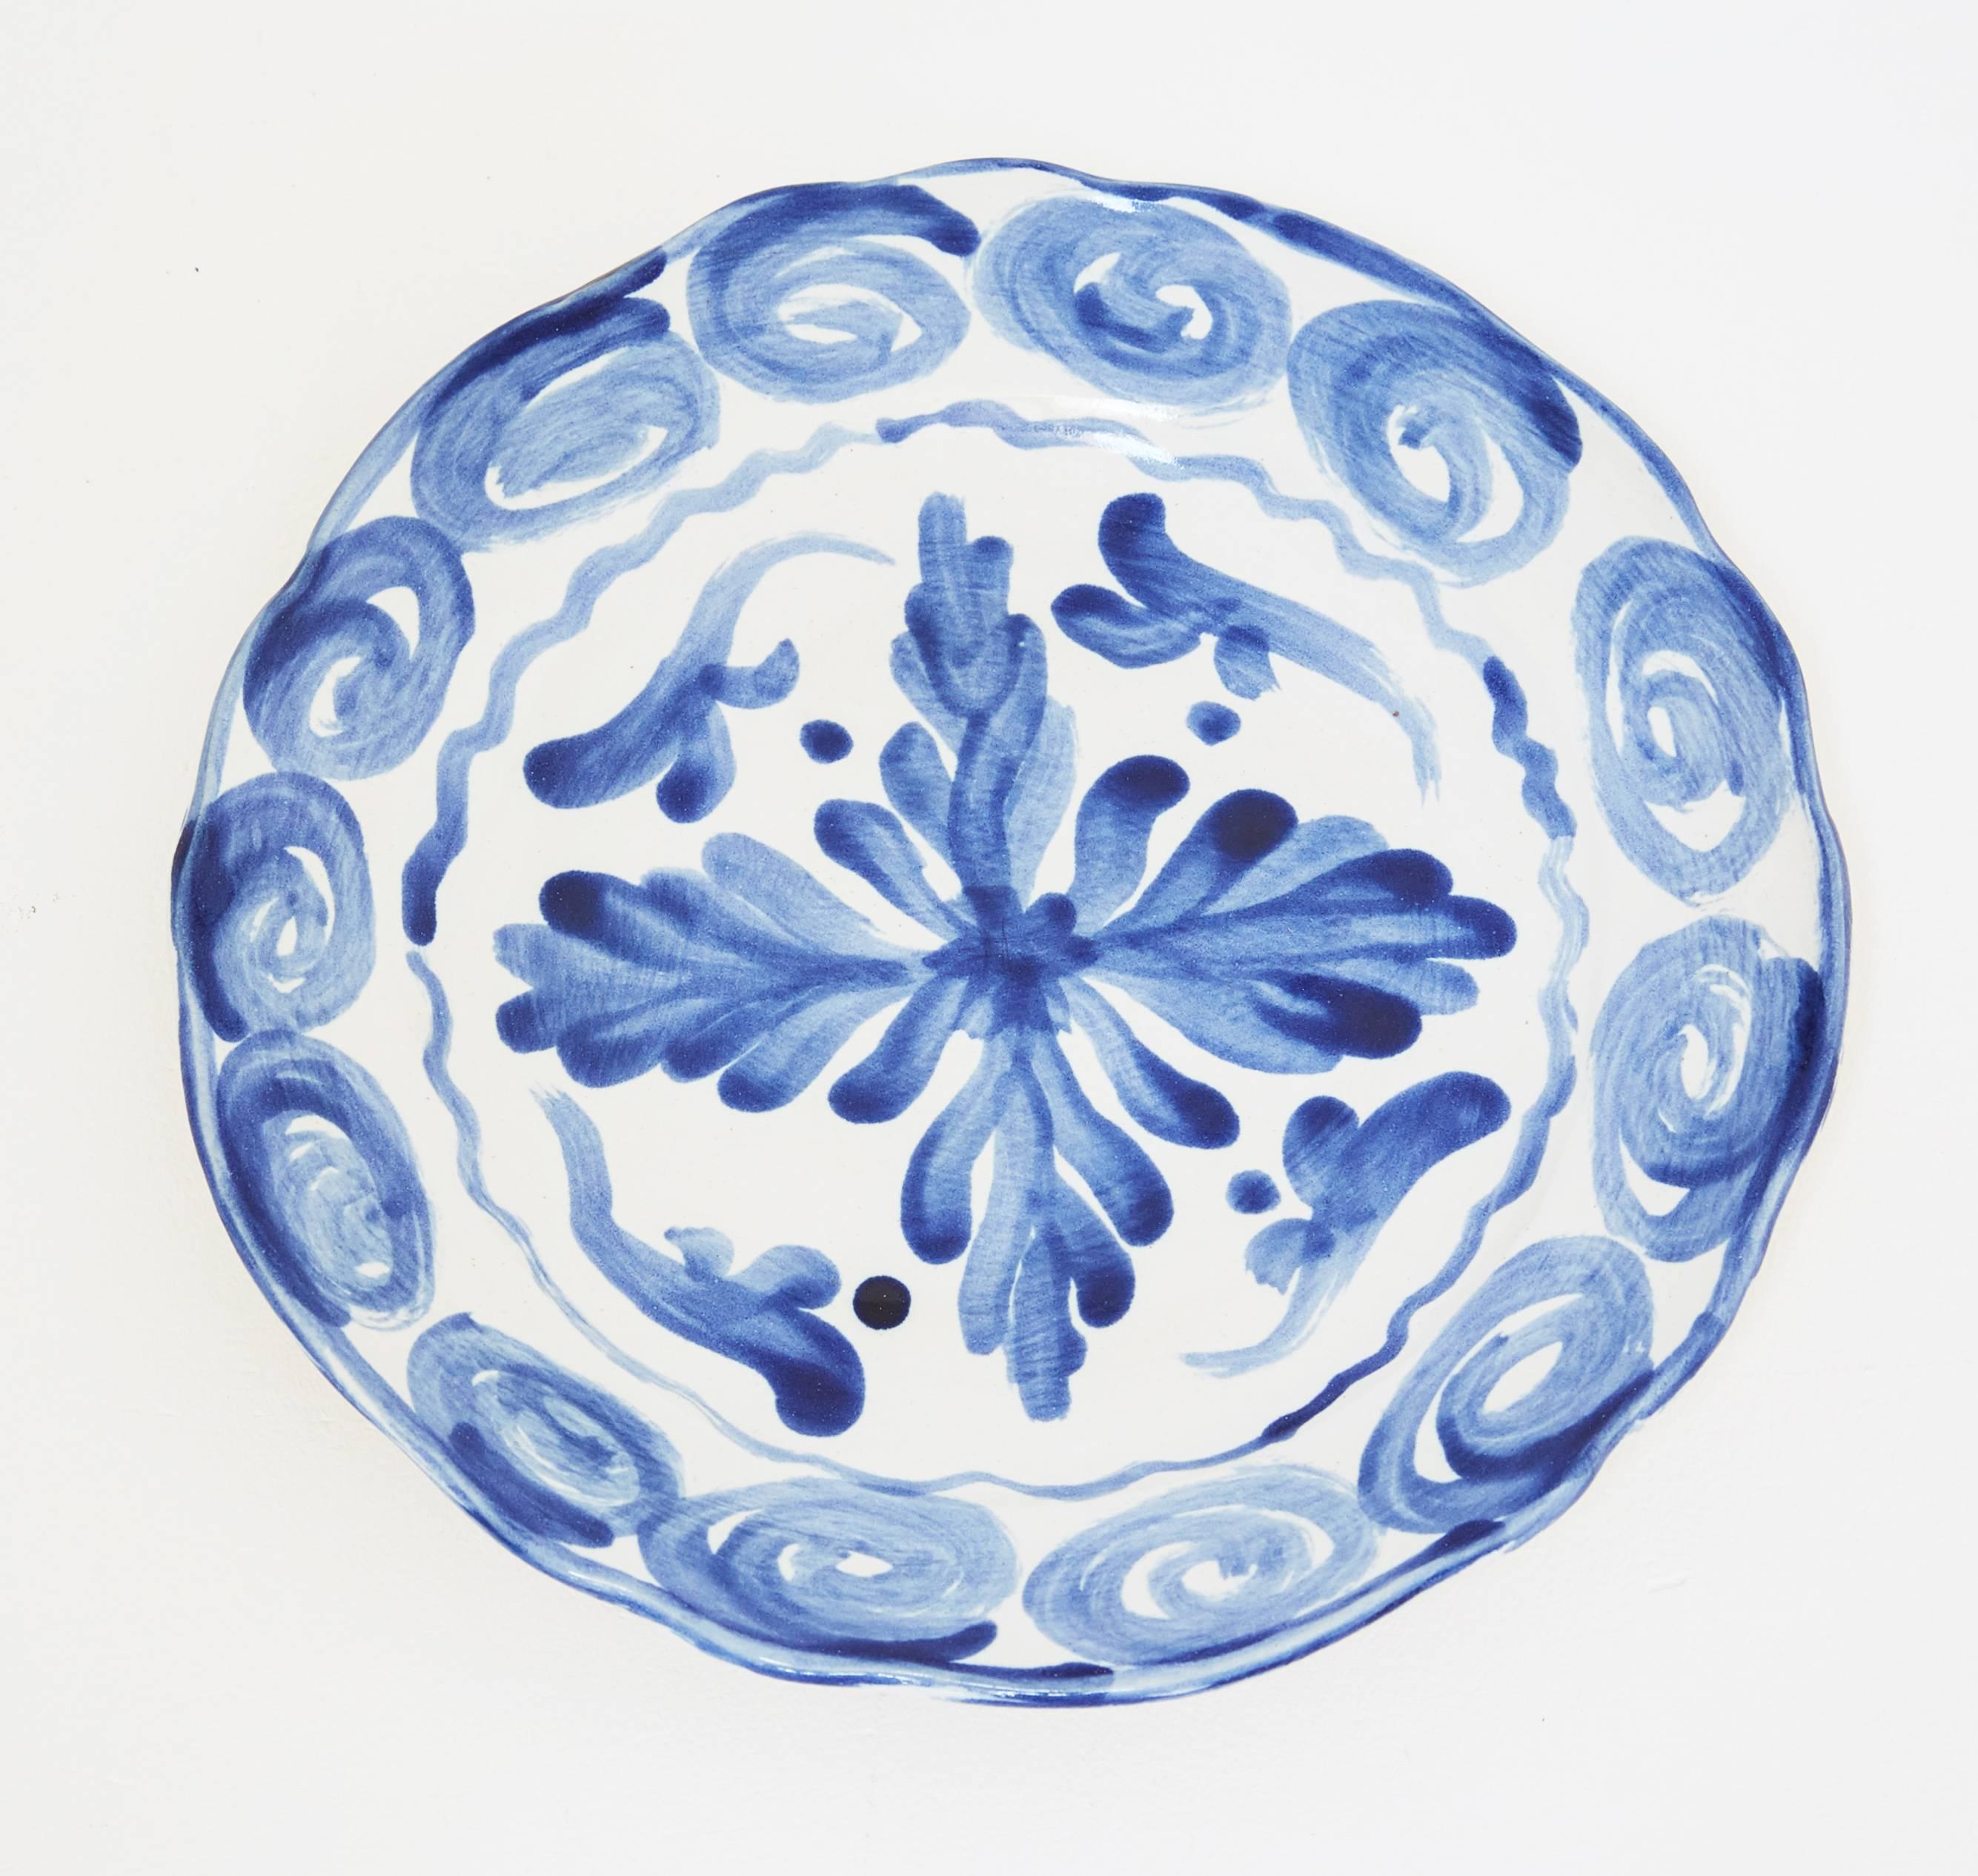 The ceramic plates are all handmade, hand-painted and high fired stoneware pieces rendering unique designs and employing a unique technique. The bottoms of the plates are not glazed. They are also dishwasher and microwave safe. The whole concept of